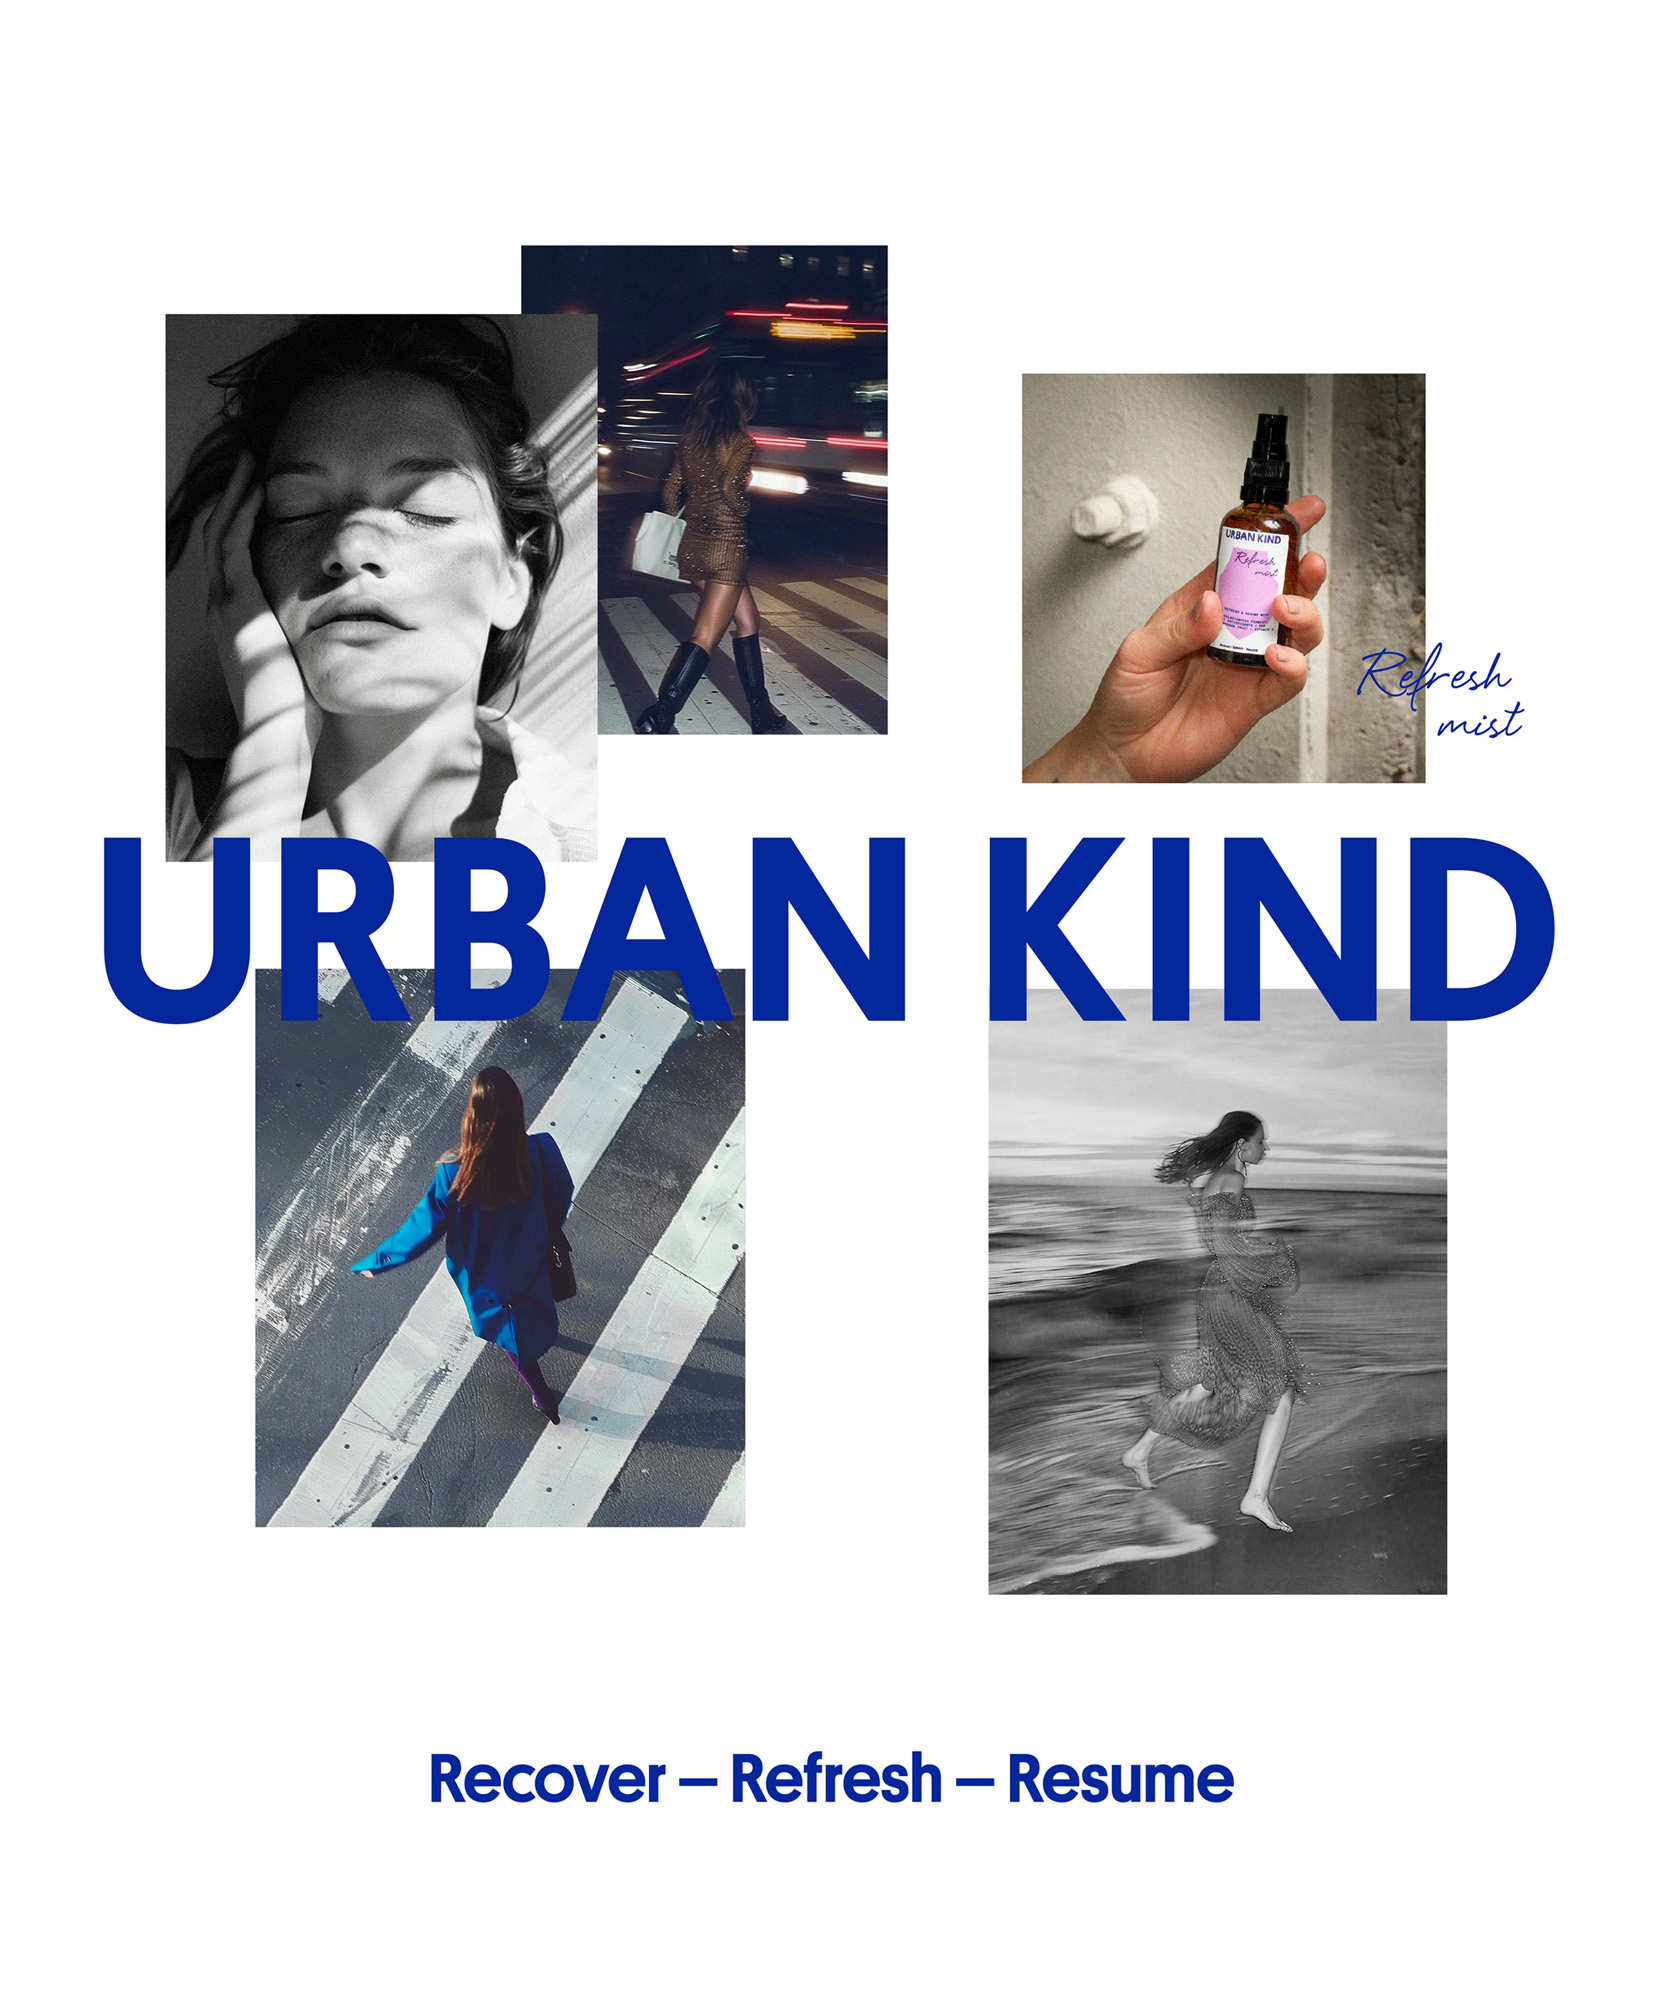 A New Skin Armour for City Dwellers: Urban Kind Launches Skincare